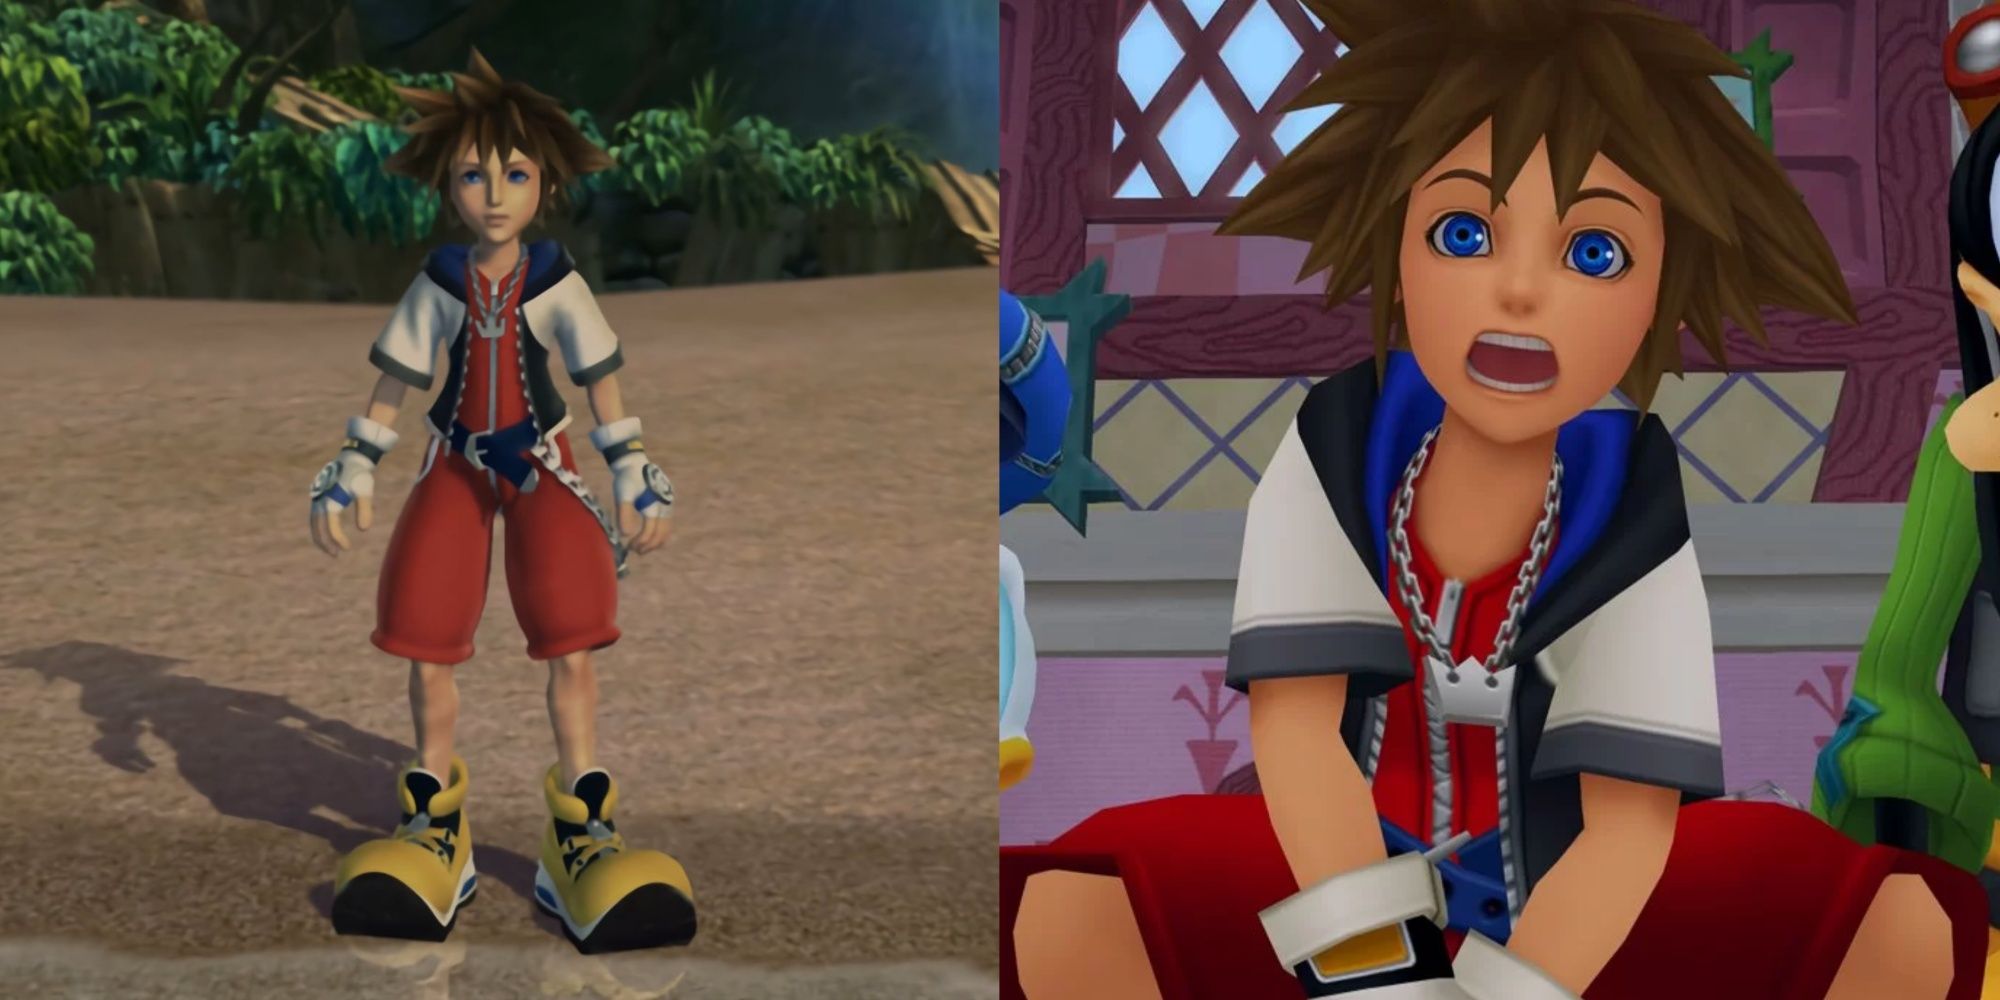 Split images of Sora in the Kingdom Hearts opening and in Wonderland